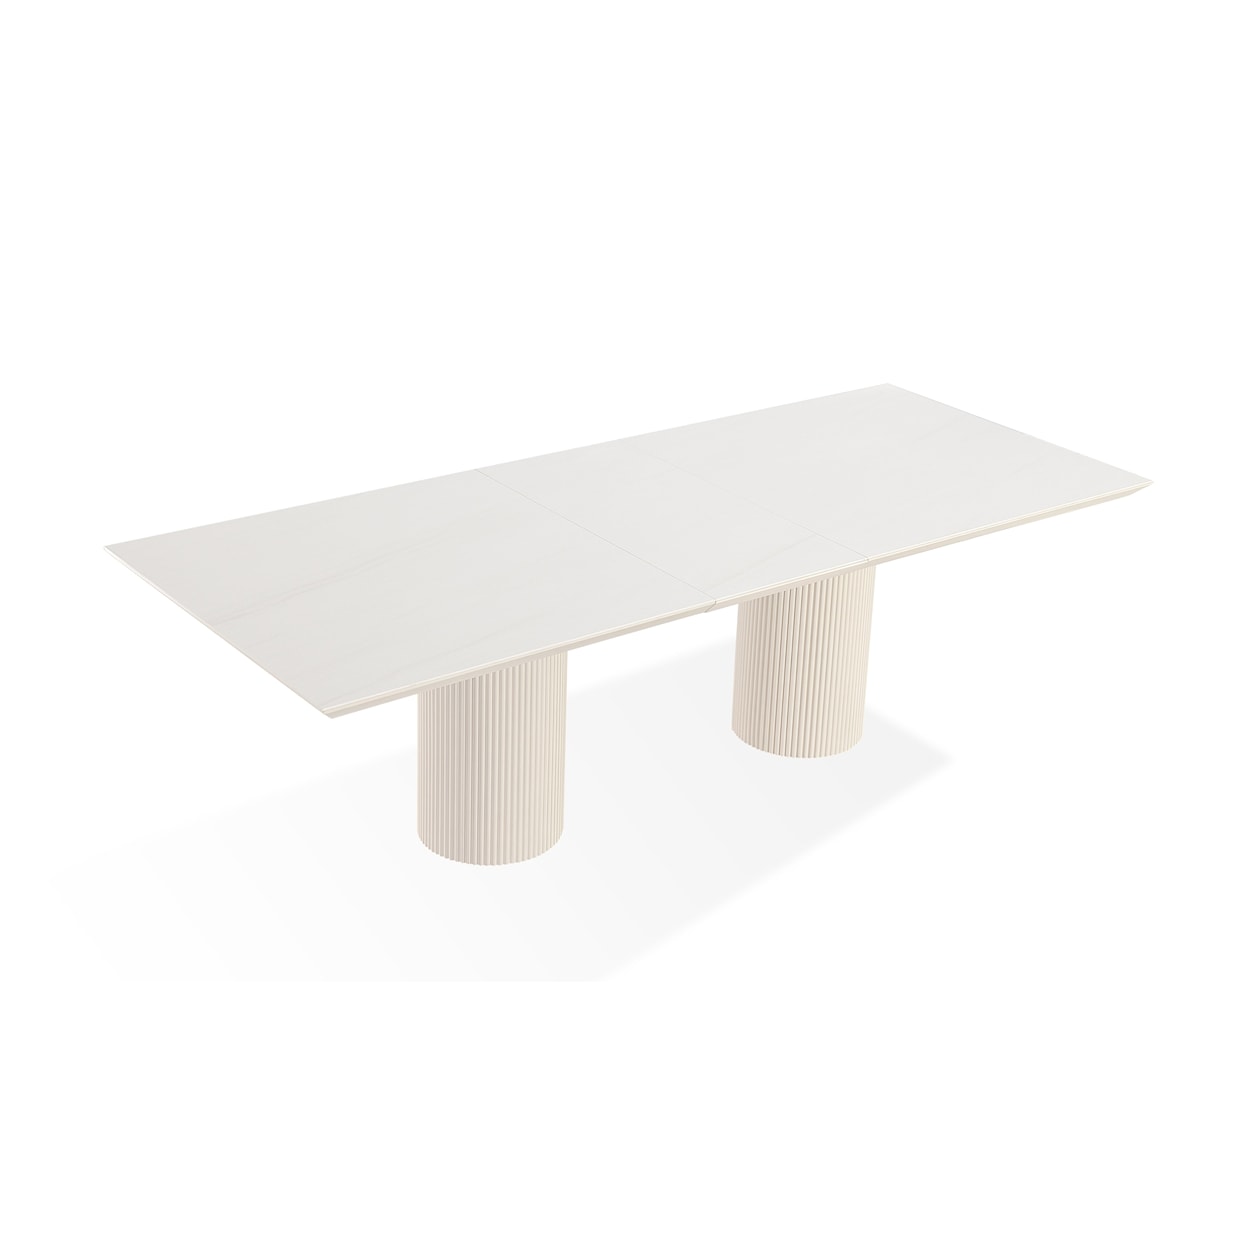 Modus International Crossroads 2.0 Cannon Stone Top Extension Dining Table